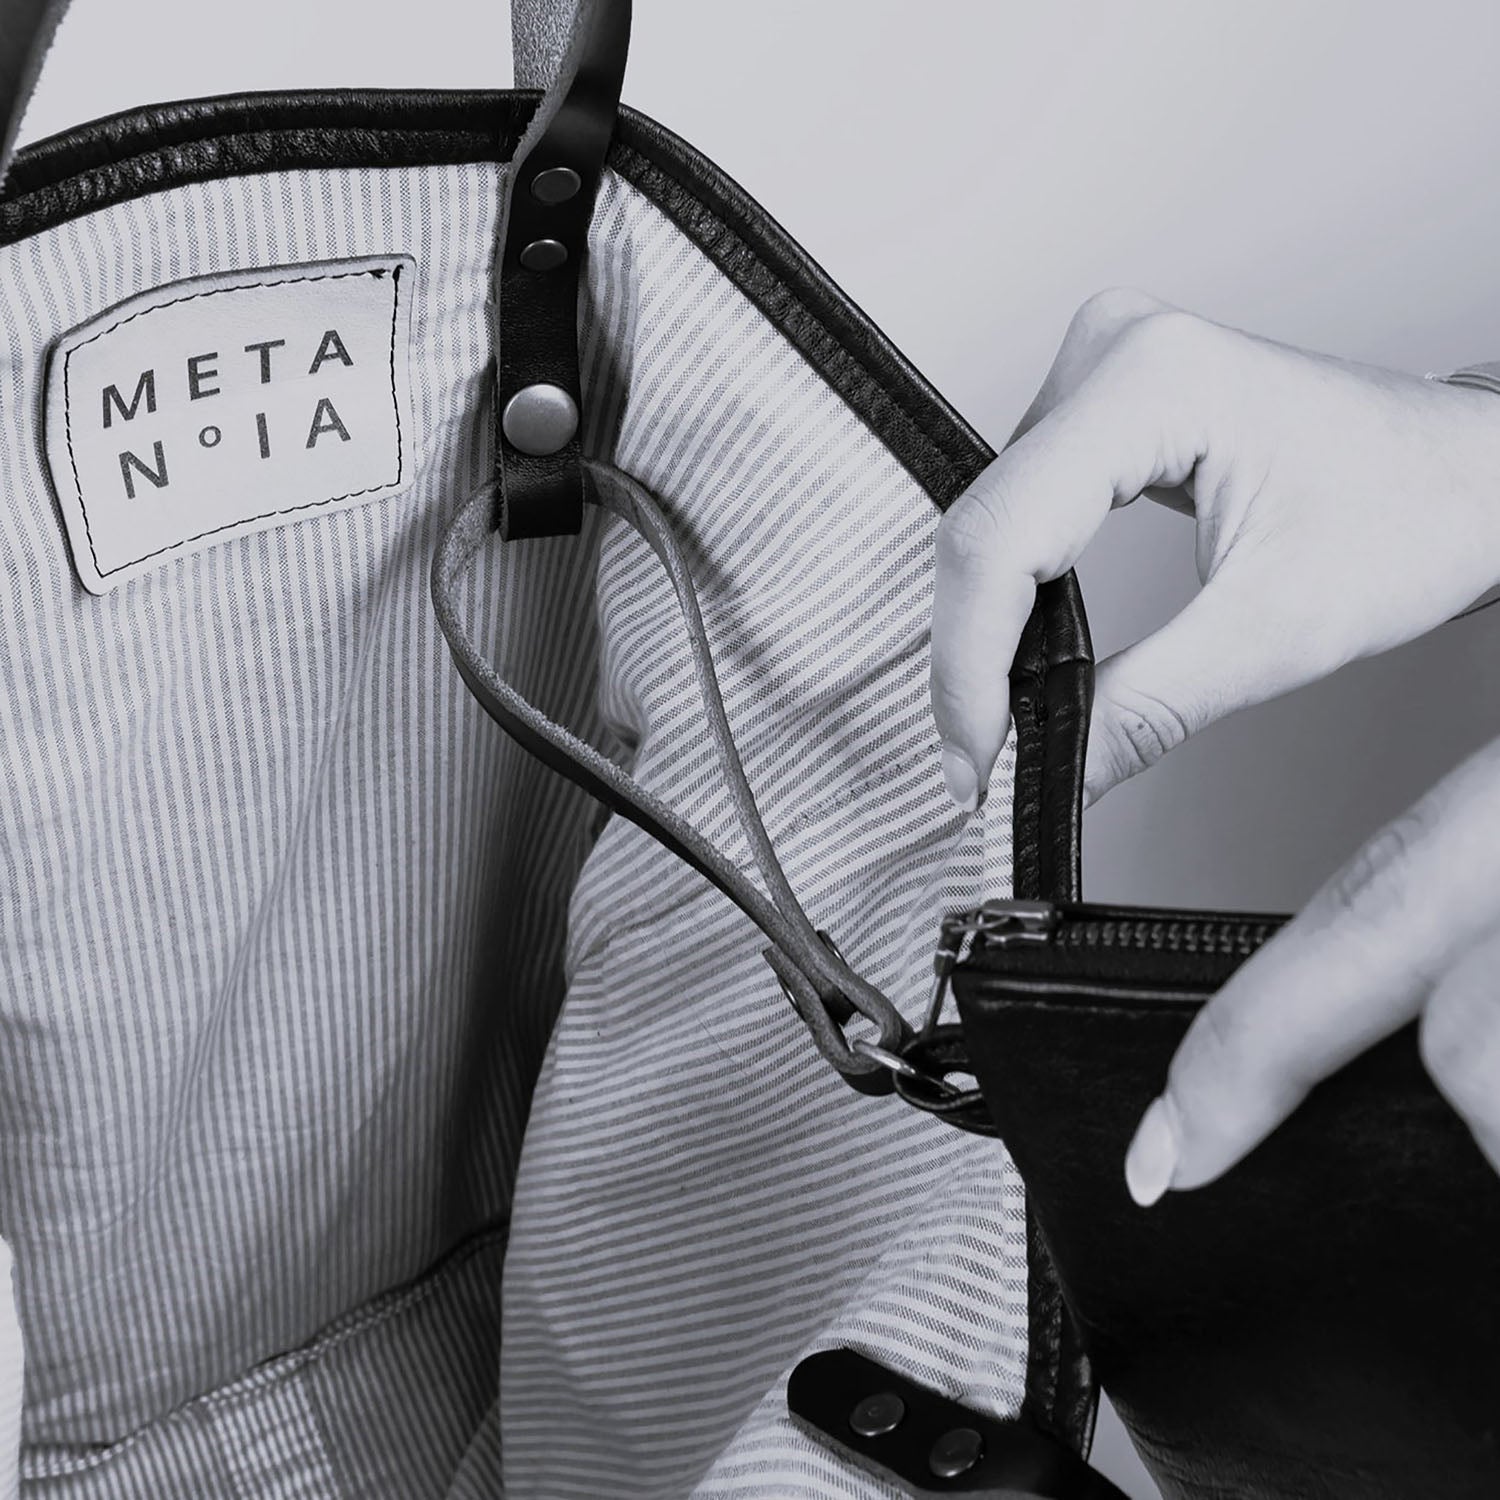 The METANoIA Medium Bag inside featuring pinstripe fabric sourced from recycled fabric and a caramel leather woven label lasered with the iconic METANoIA label.